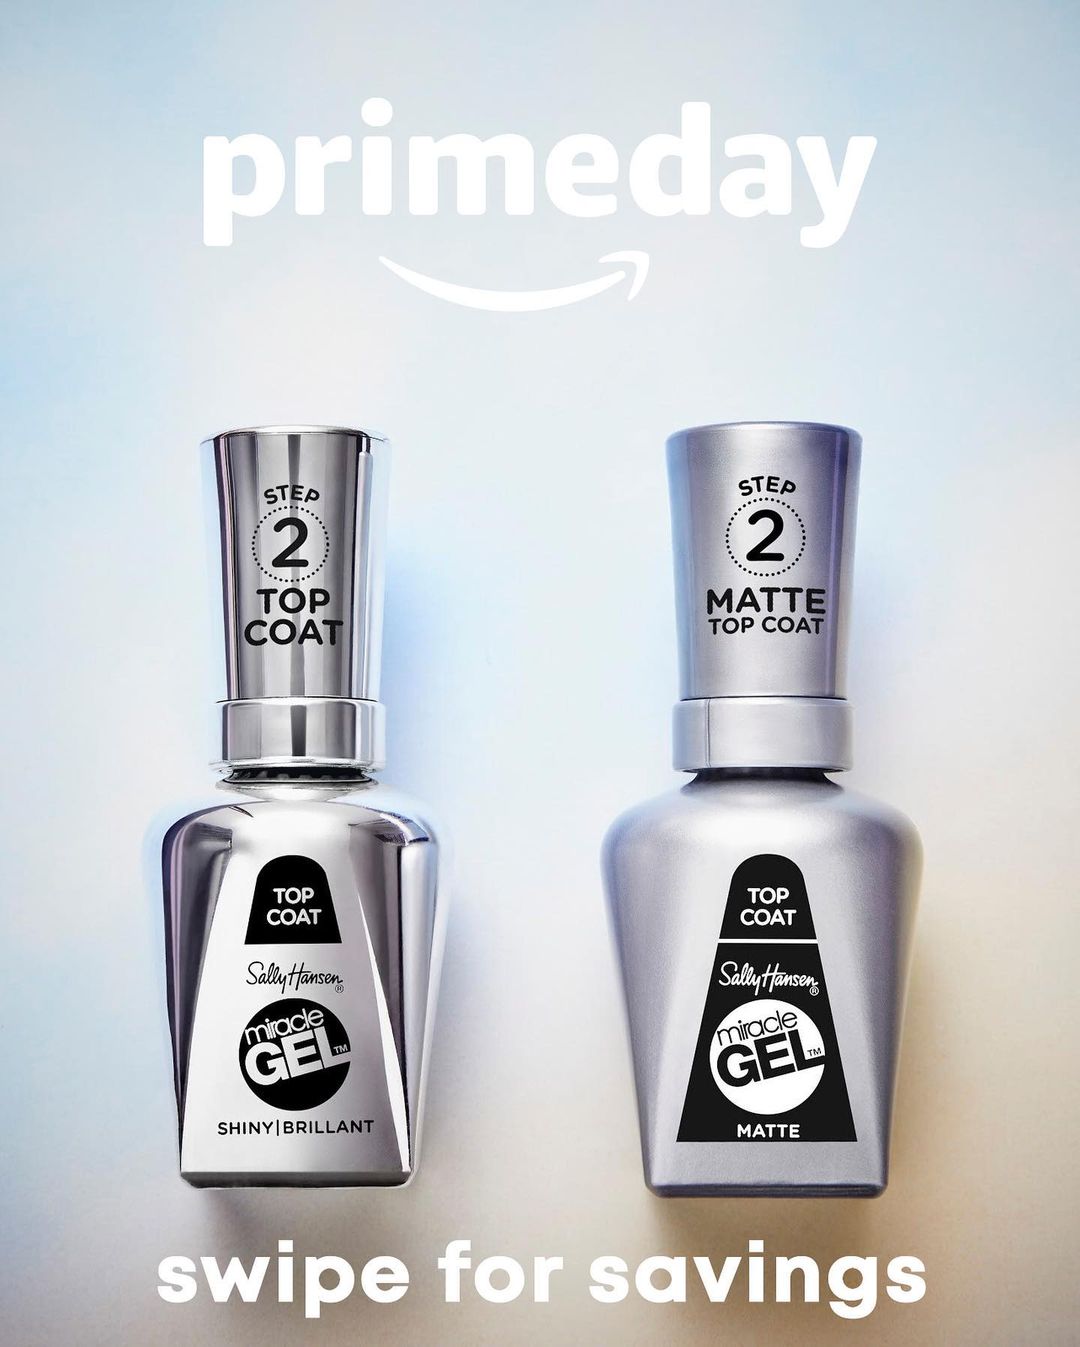 Sally Hansen - It’s the most wonderful time of the year 🎶 It’s officially #PrimeDay which means it’s time to save BIG on your fave shades! Get 🔥discounts on our Miracle Gel nail color, Good.Kind.Pure....